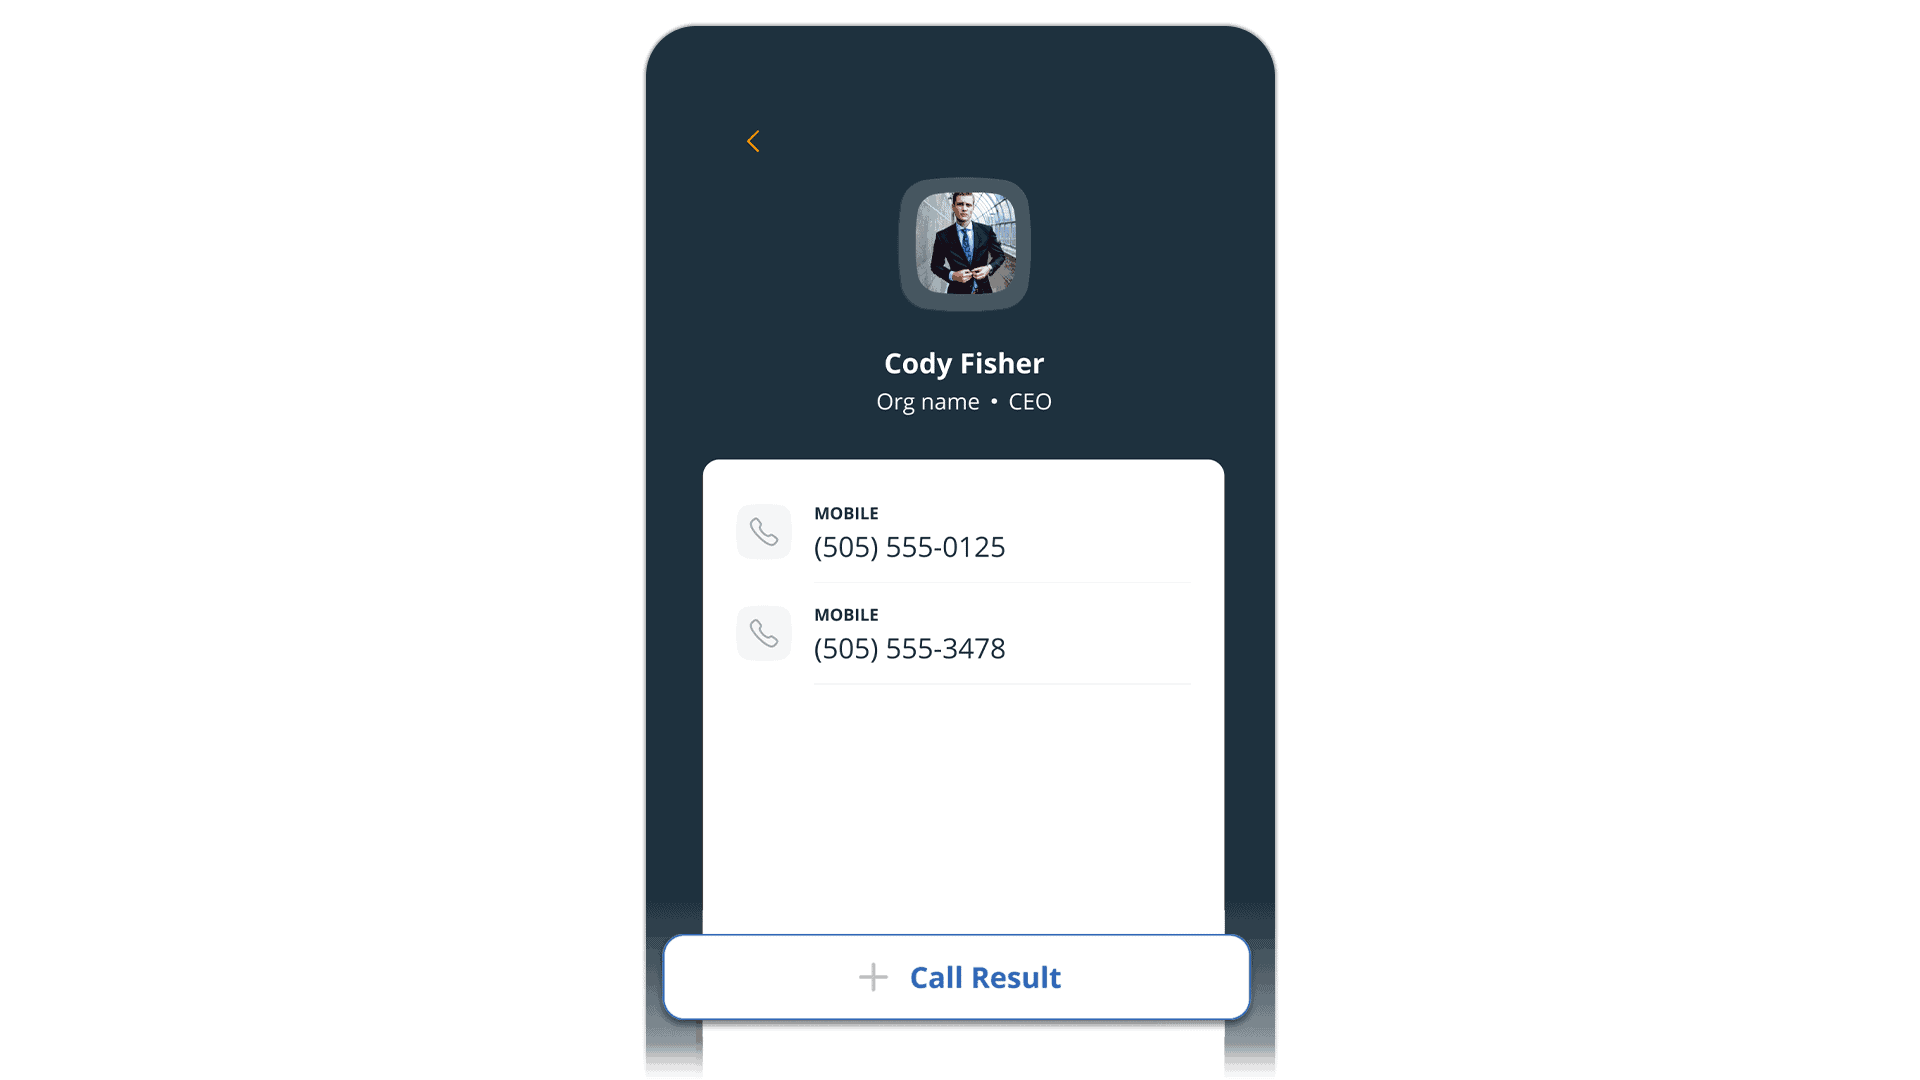 On the Road also allows you to speed dial your contacts, log call results and leave notes